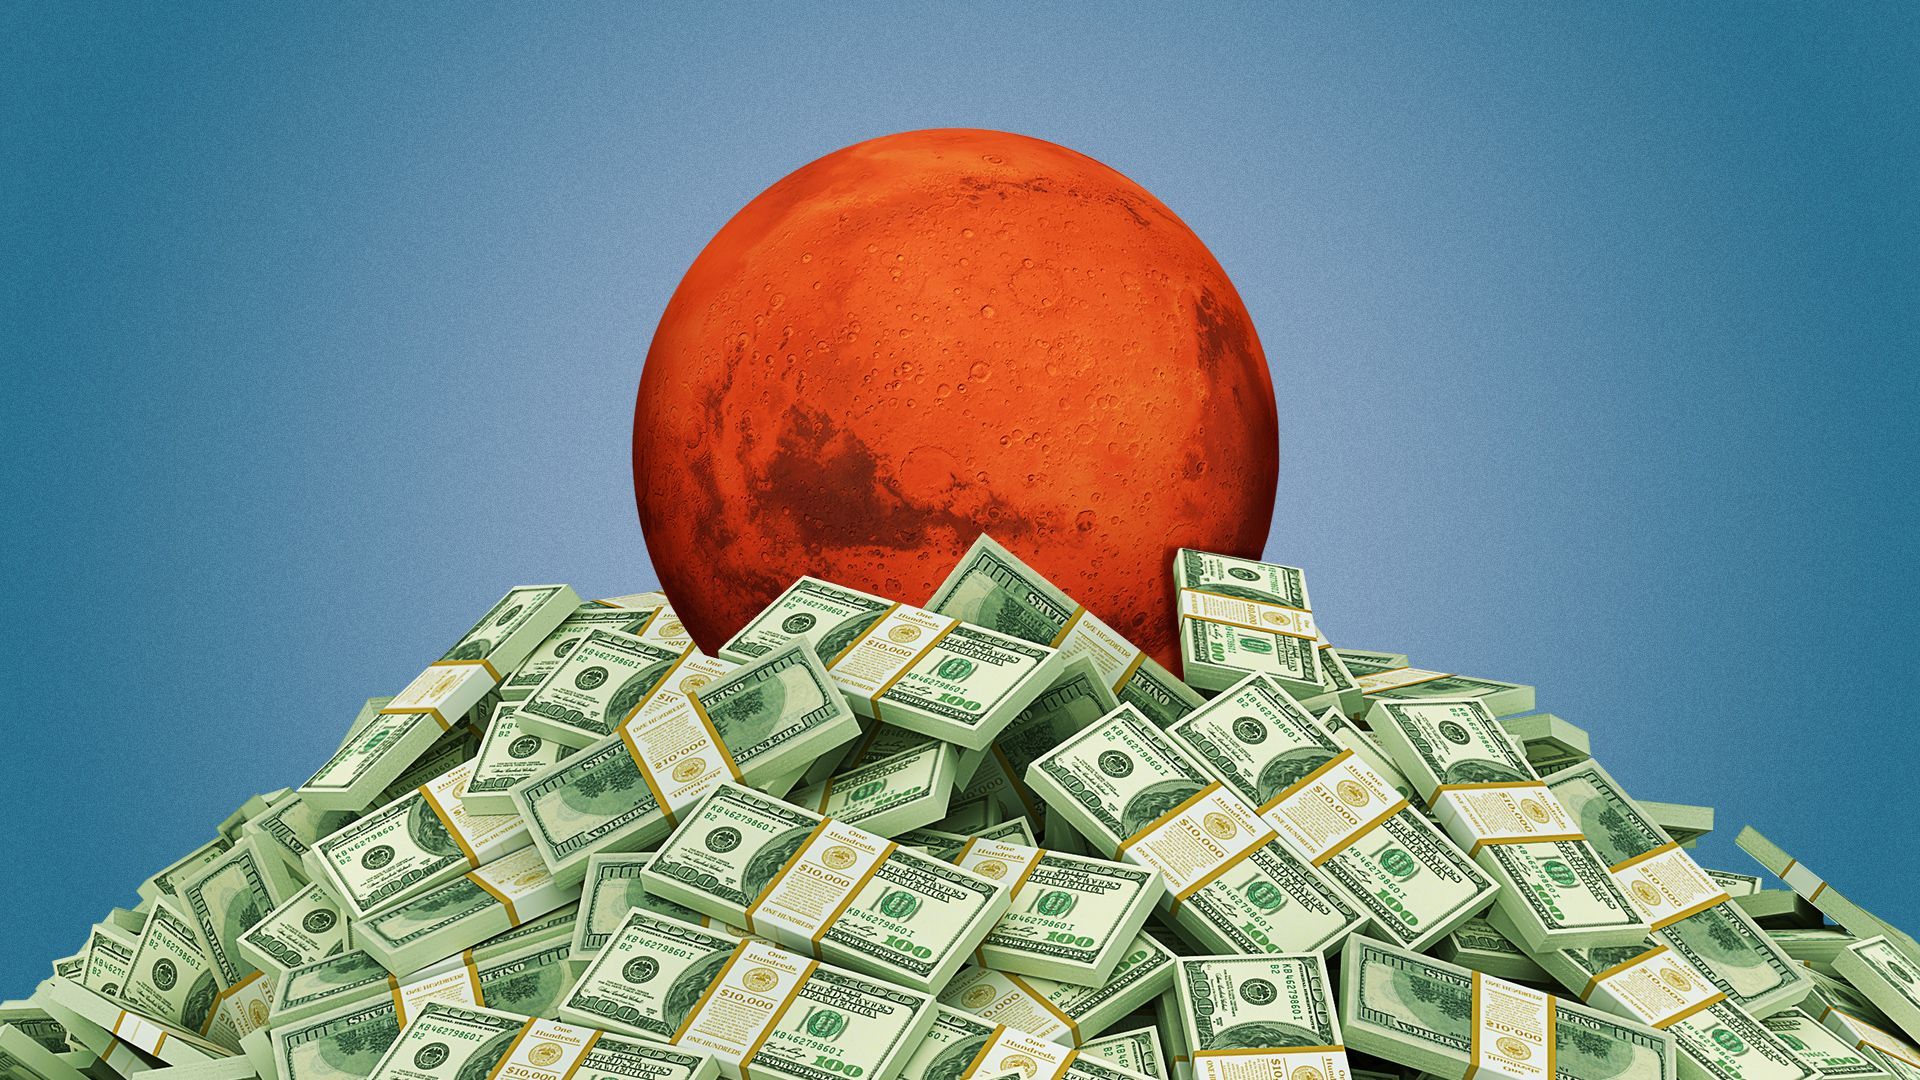 Illustration of Mars sitting at the top of a large pile of money. 